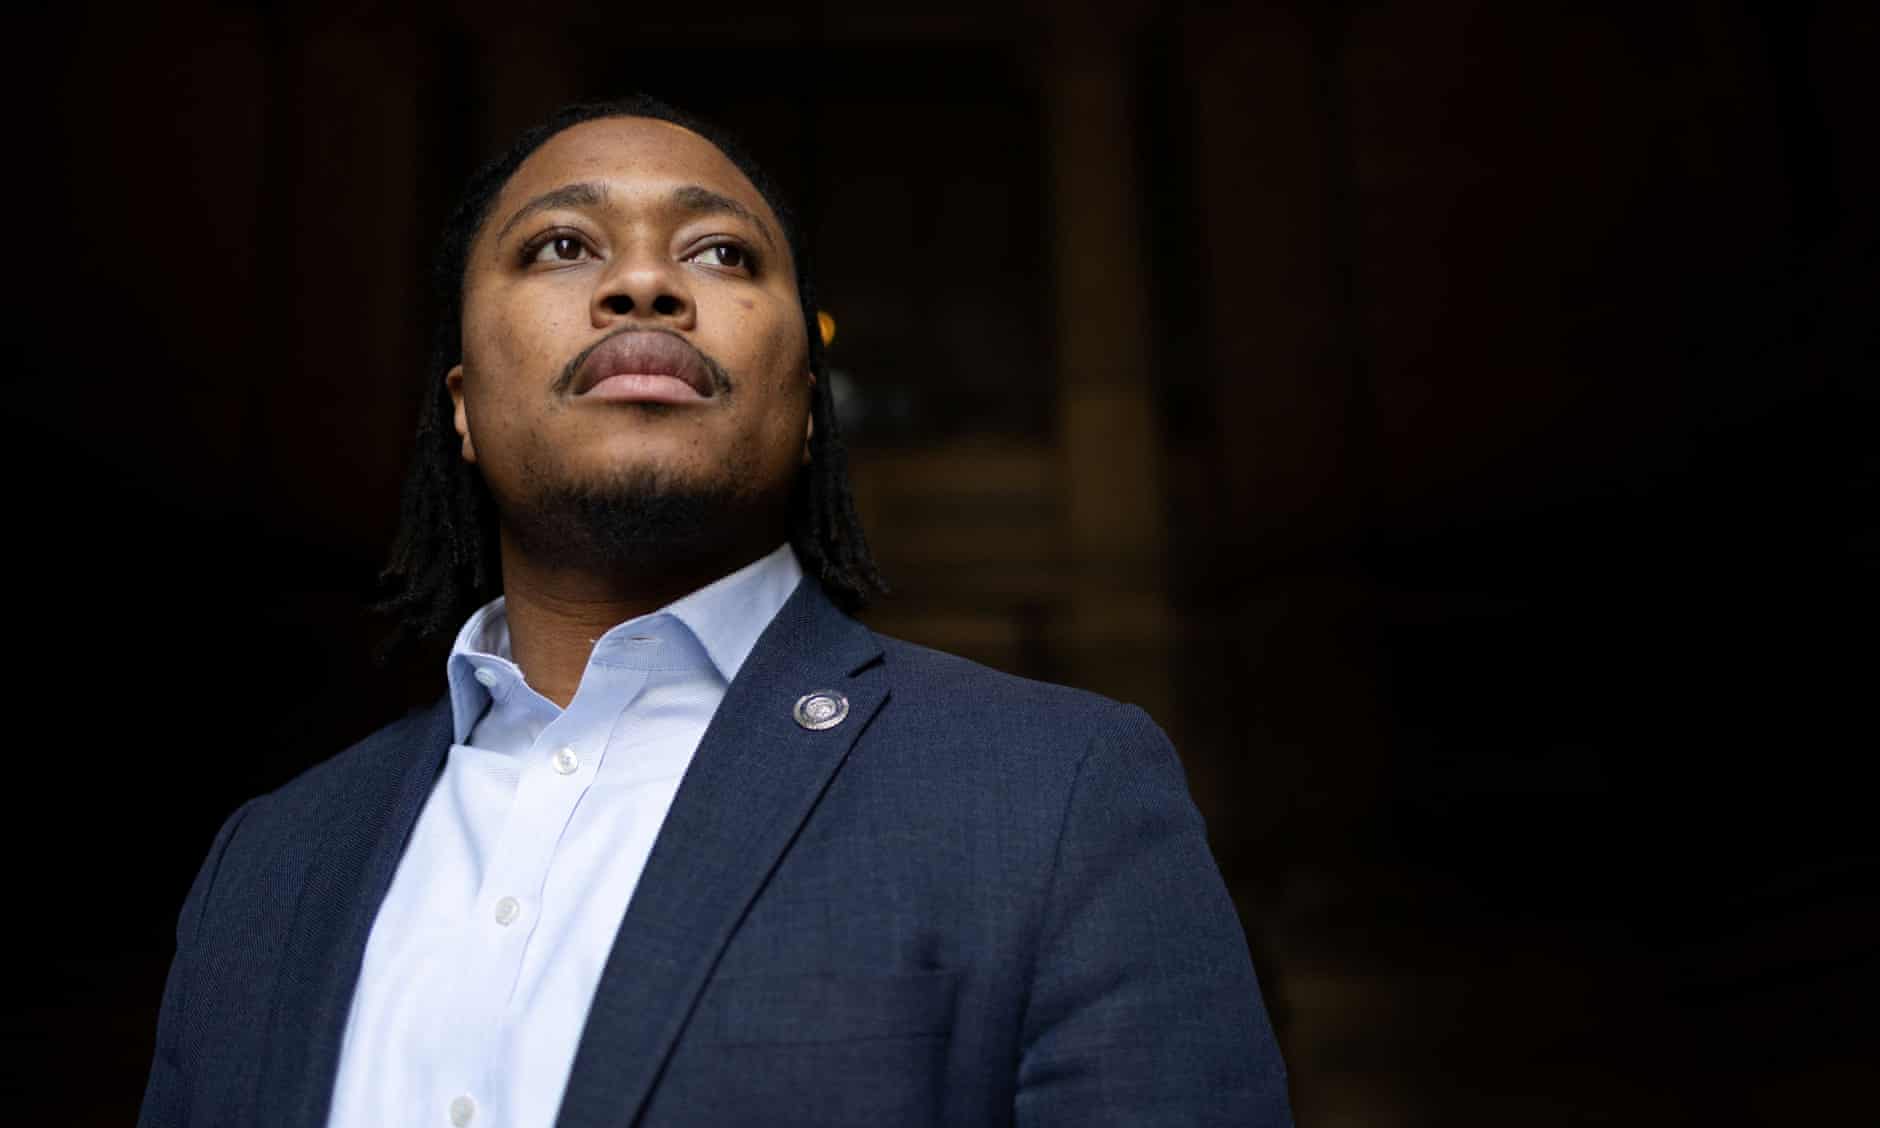 Philadelphia’s rising Democratic star on another school shooting: ‘I can’t become resigned to it’ (theguardian.com)